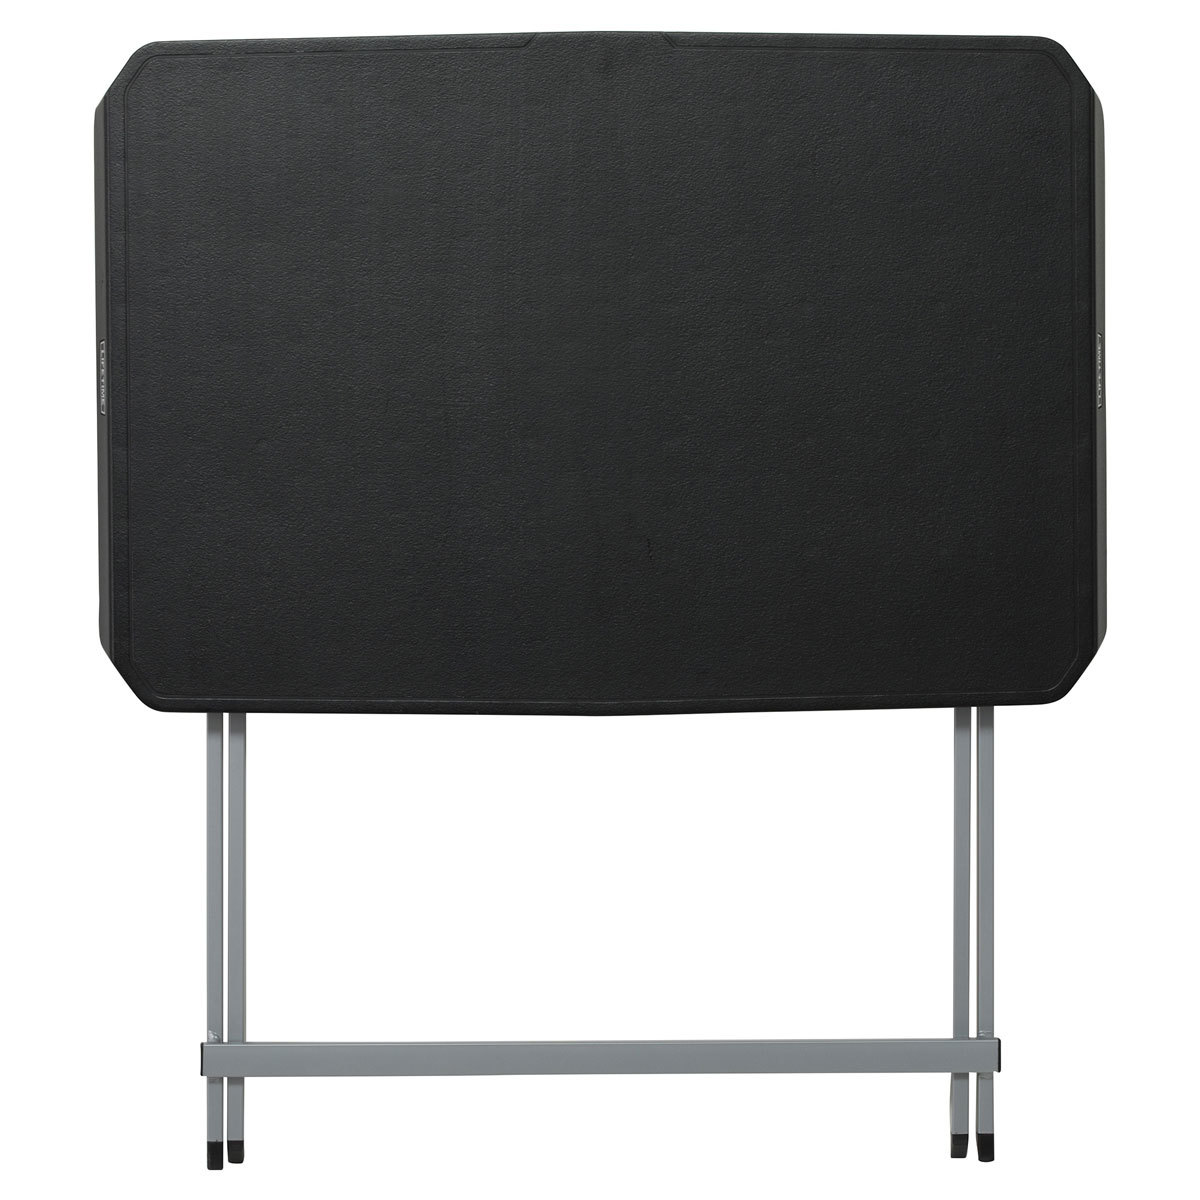 Lifetime 30" (2.5ft) Black Personal Commercial Table